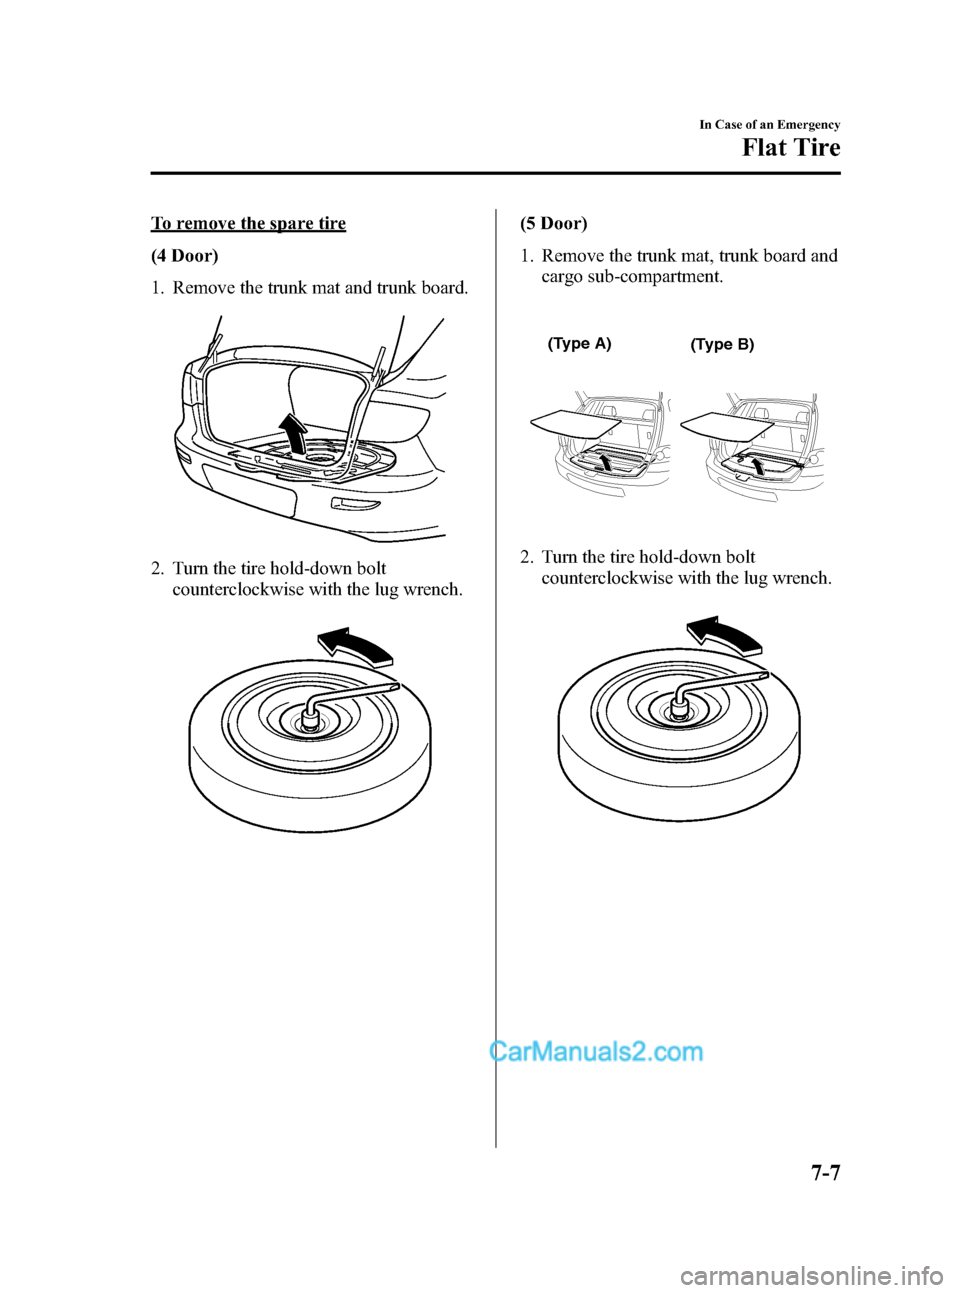 MAZDA MODEL MAZDASPEED 3 2008  Owners Manual (in English) Black plate (251,1)
To remove the spare tire
(4 Door)
1. Remove the trunk mat and trunk board.
2. Turn the tire hold-down bolt
counterclockwise with the lug wrench.
(5 Door)
1. Remove the trunk mat, t